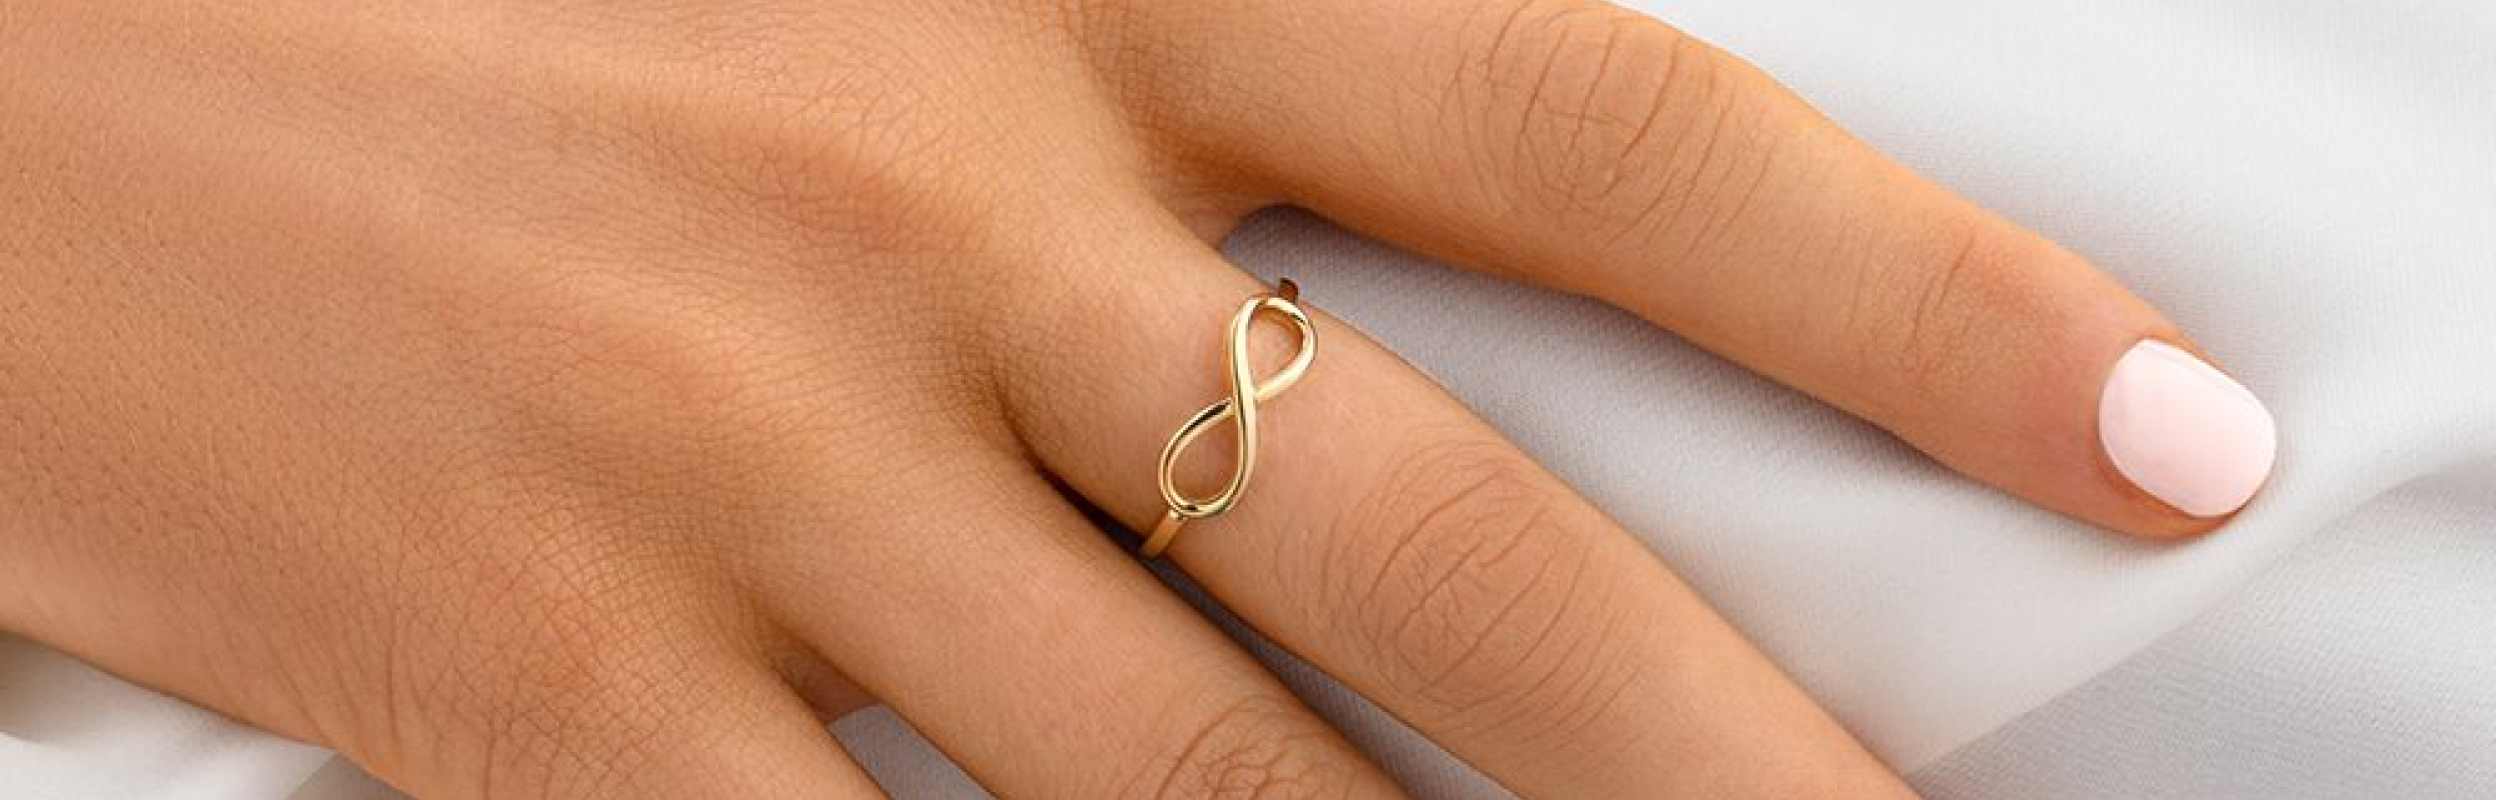 gold infinity ring worn by woman